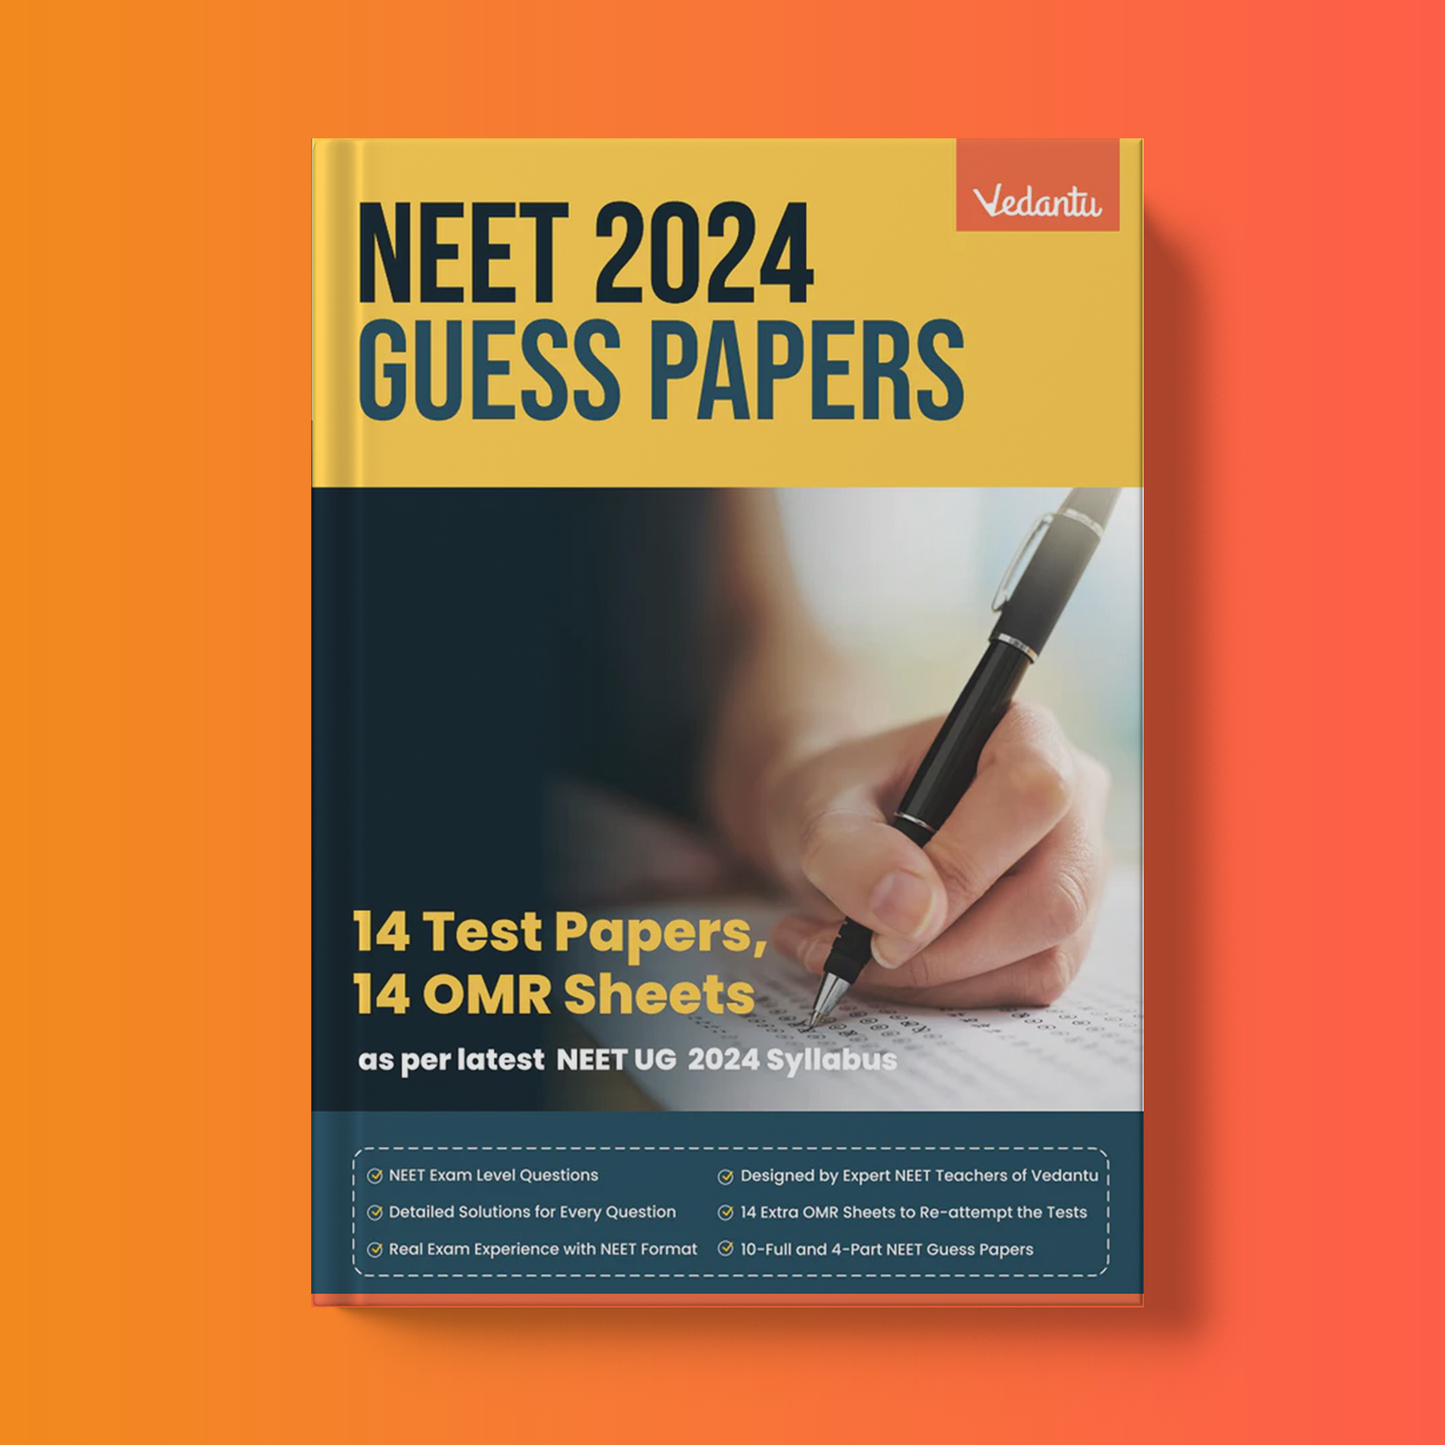 Vedantu NEET 2024 Guess Papers with 4 Part Test and 10 Full NEET Syllabus Test